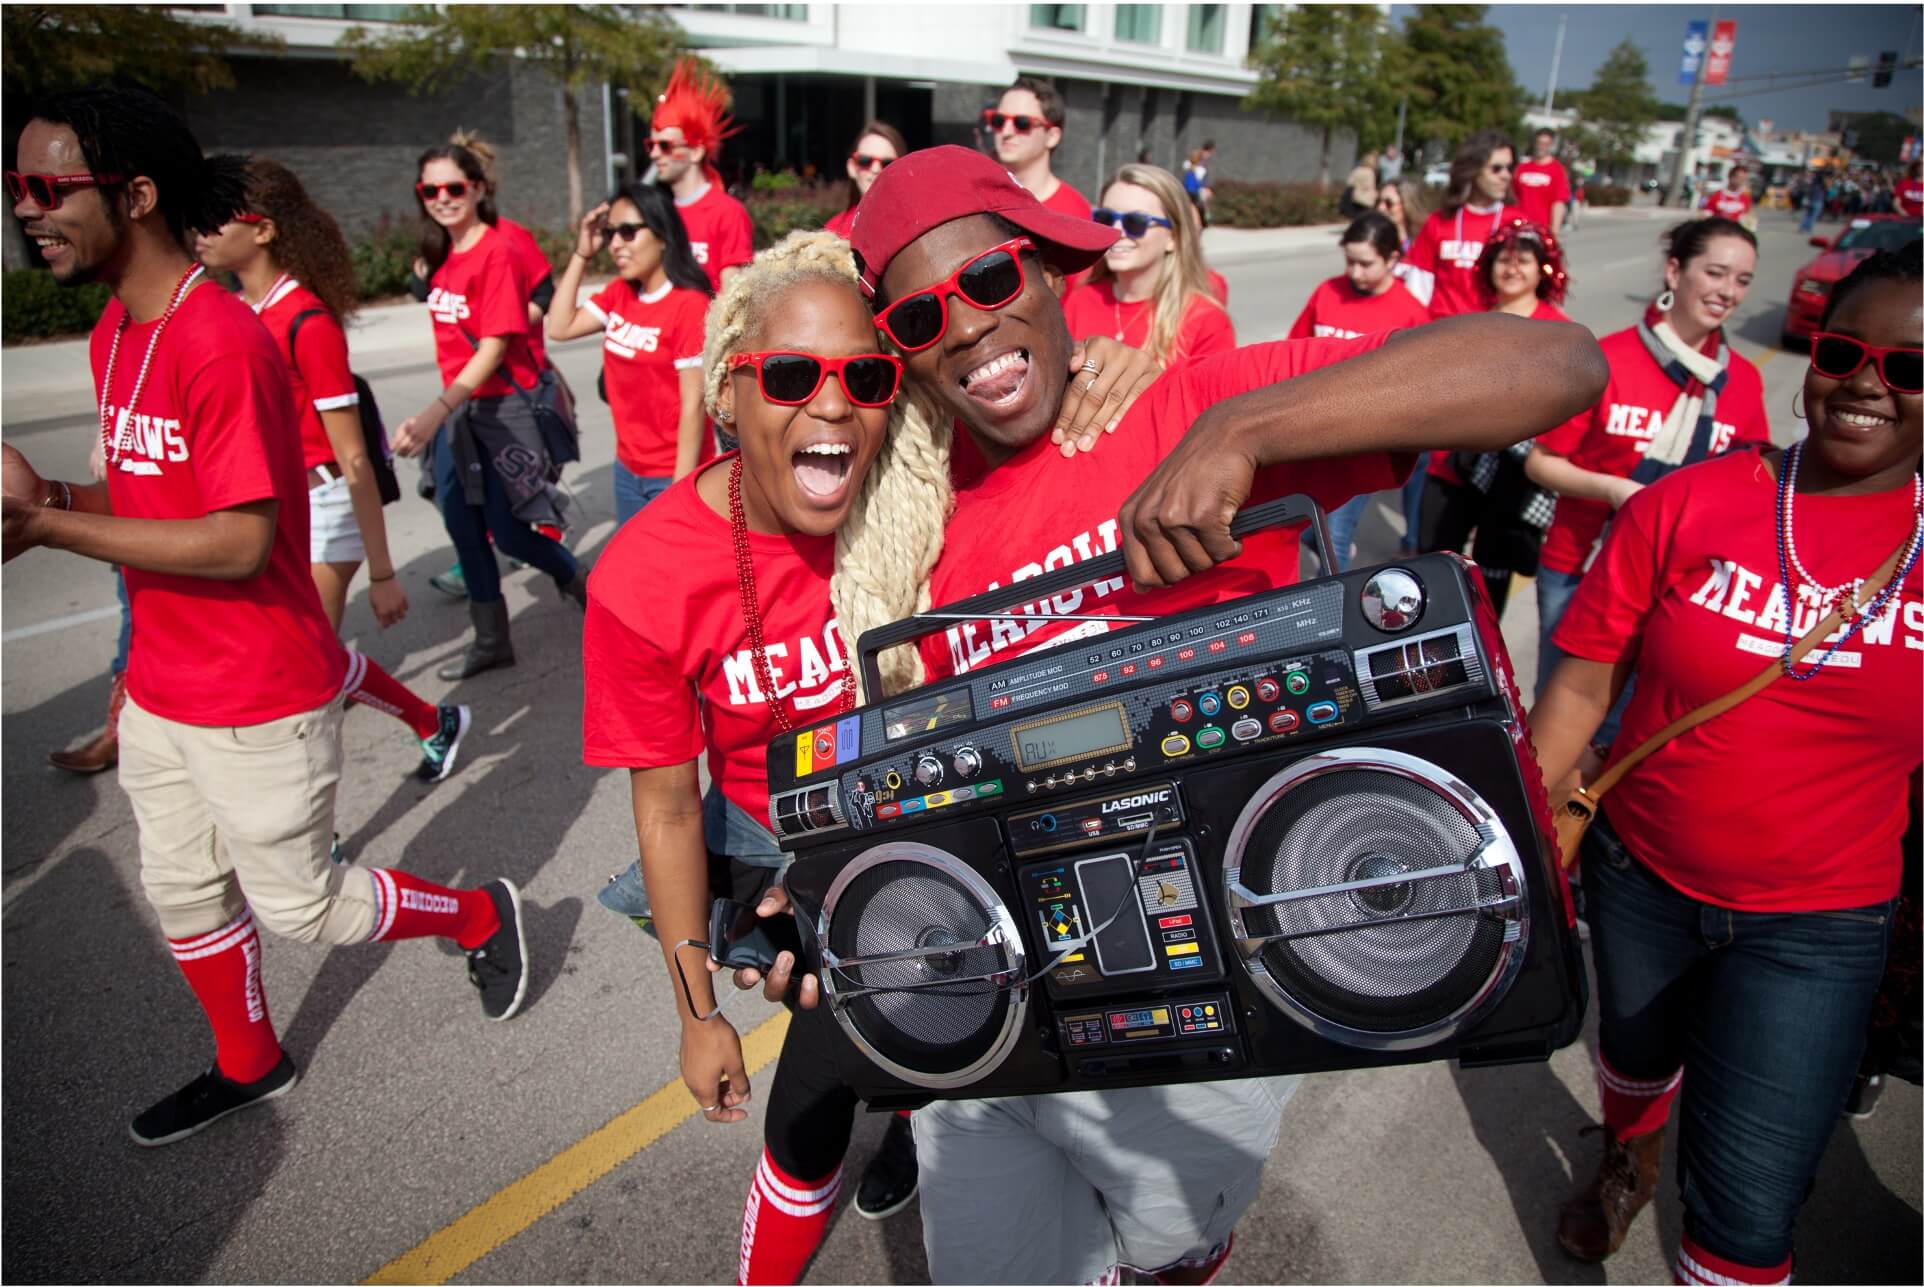 Homecoming students wearing red shirts holding a boombox